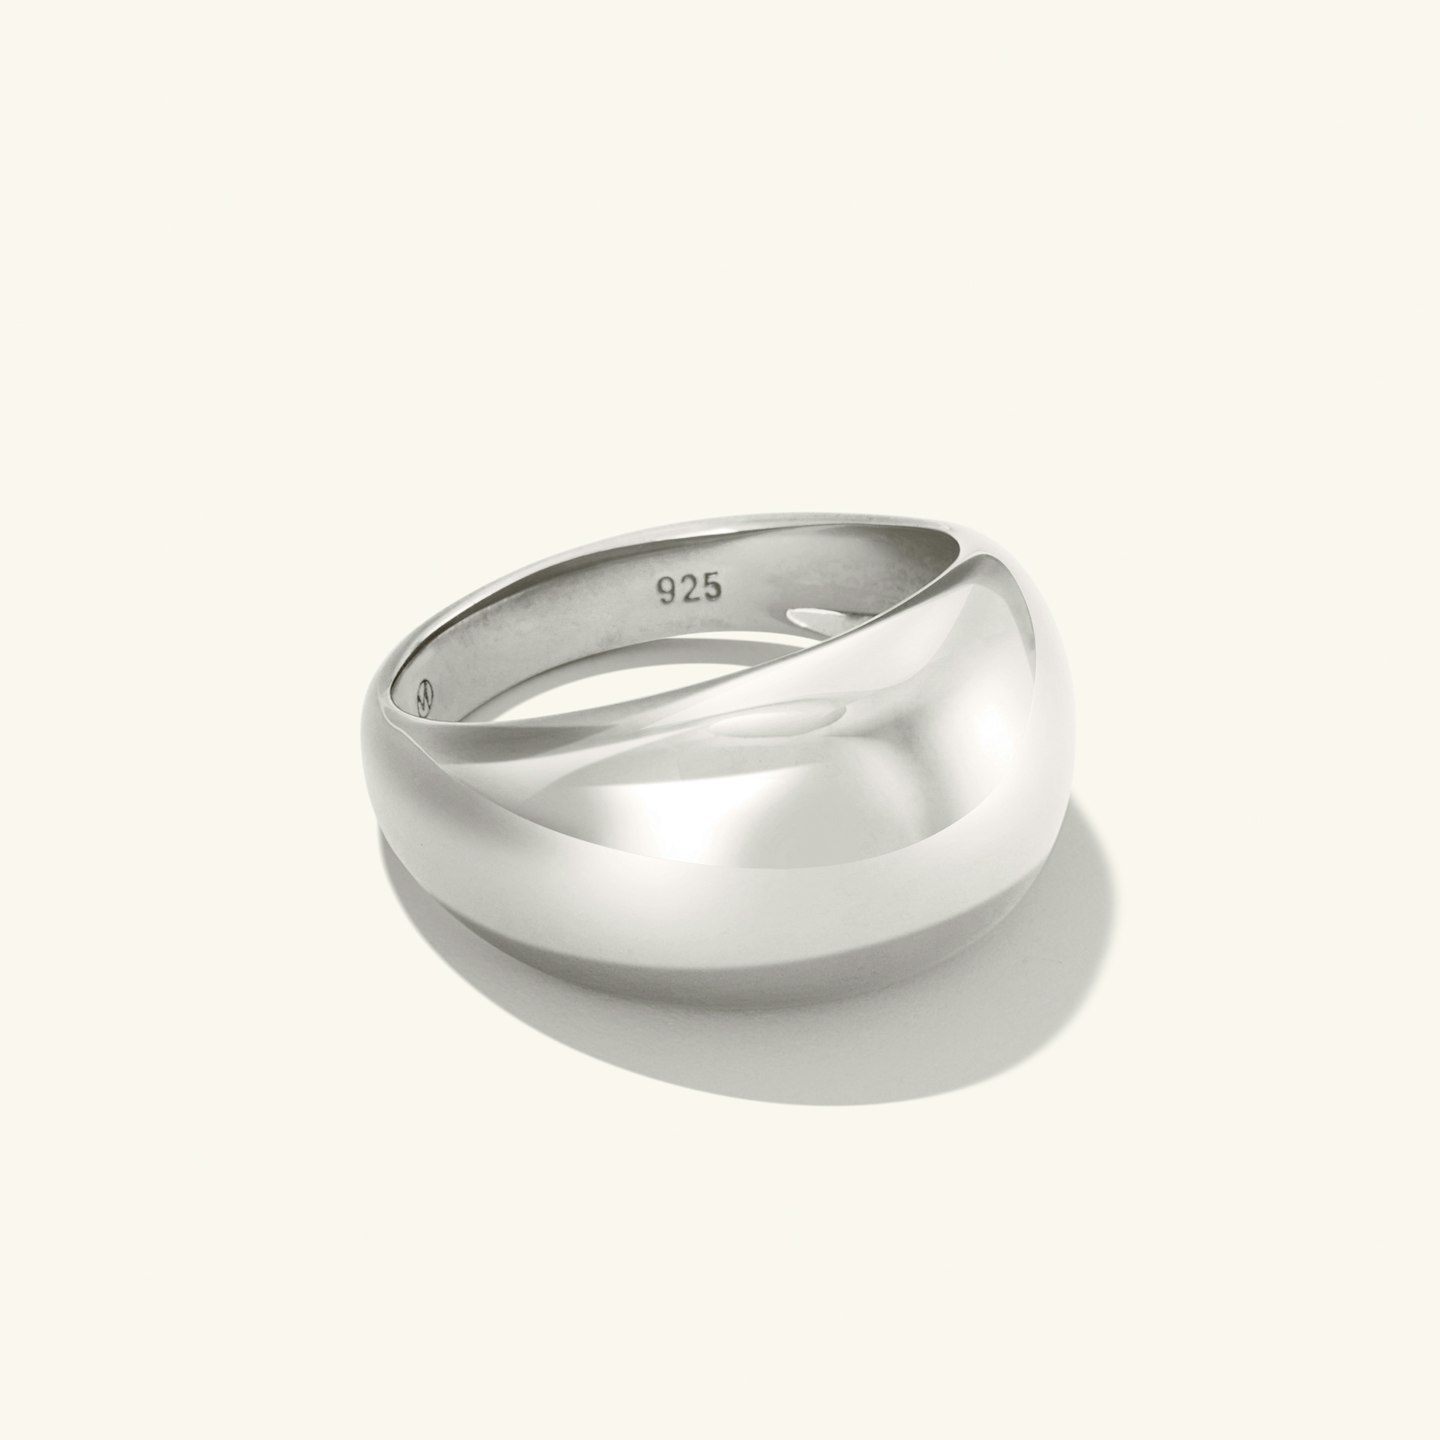 mejuri silver dome ring 50 under 50